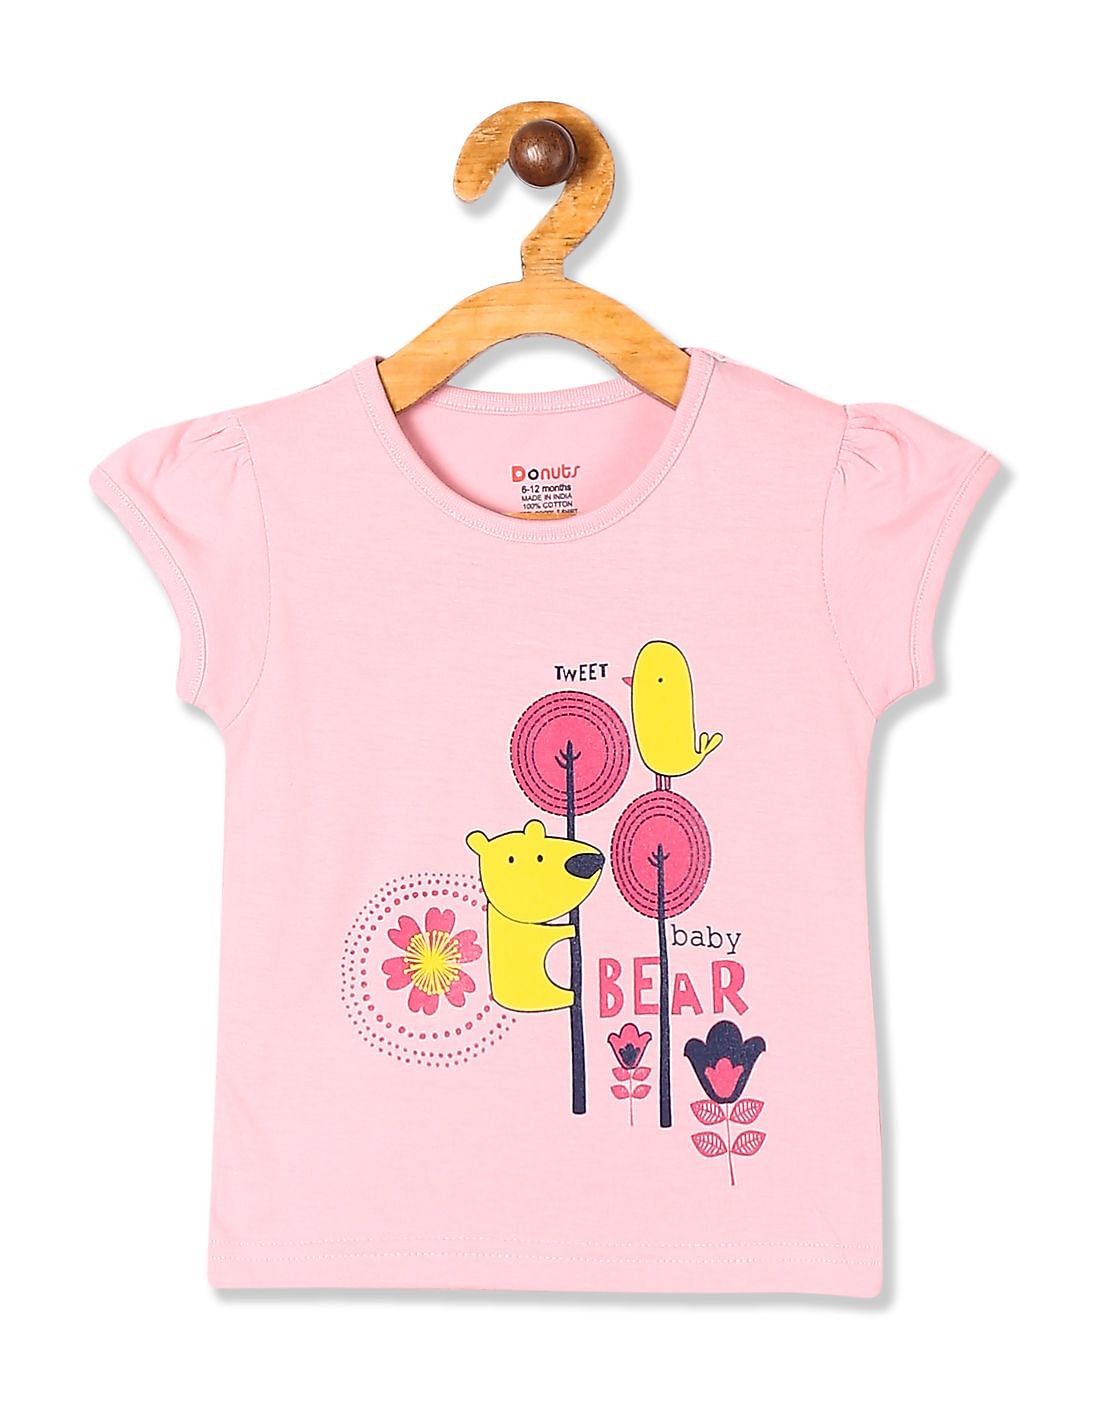 Buy Donuts Pink Girls Crew Neck Graphic T-Shirt - NNNOW.com